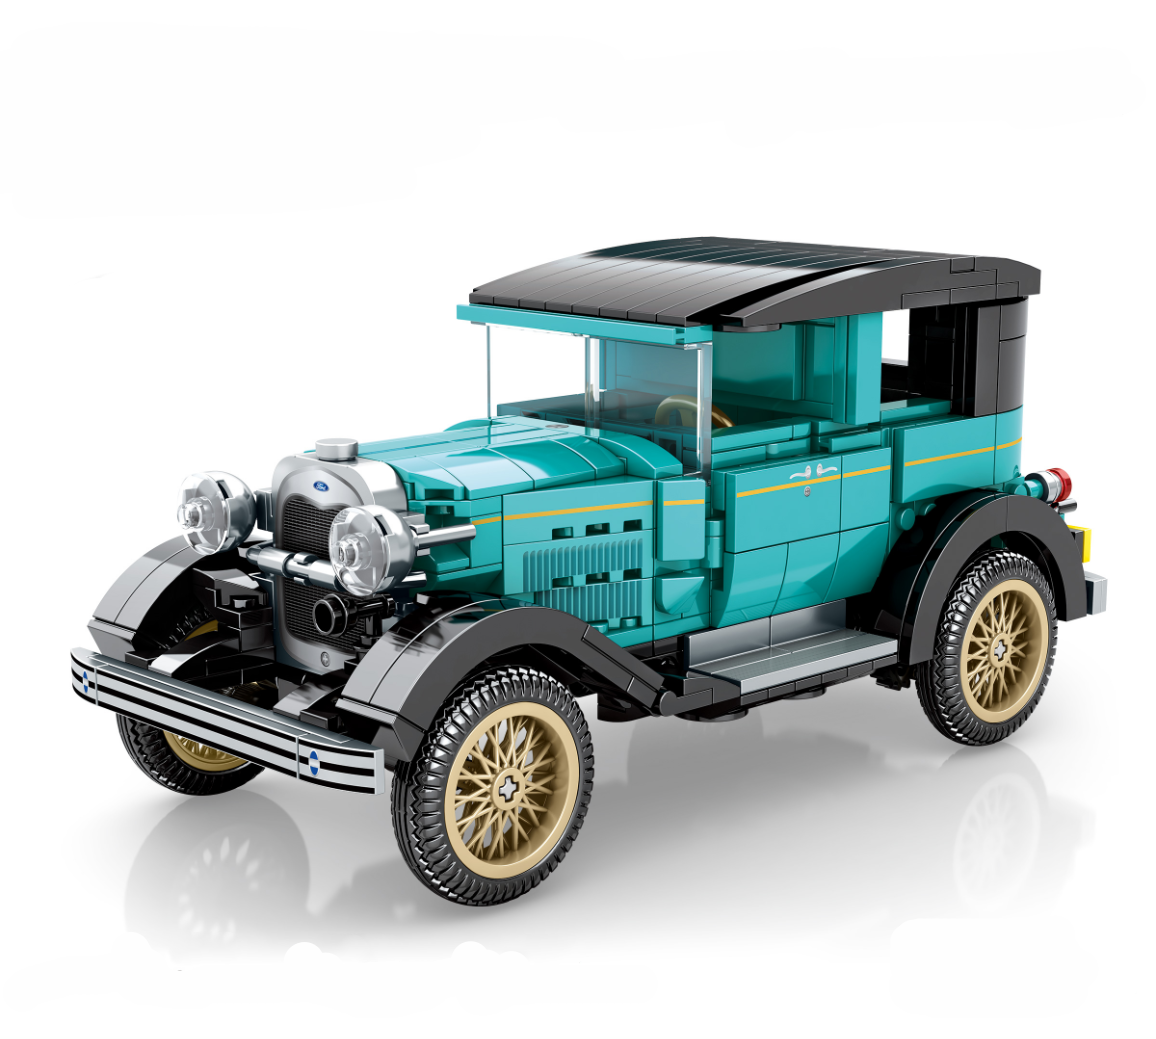 Конструктор SEMBO BLOCK Ford 1930 Model A, 659 деталей, 705807 maisto 1 24 1970 ford mustang boss 302 mustang roadster ford mustang simulation alloy car model collection gift toy